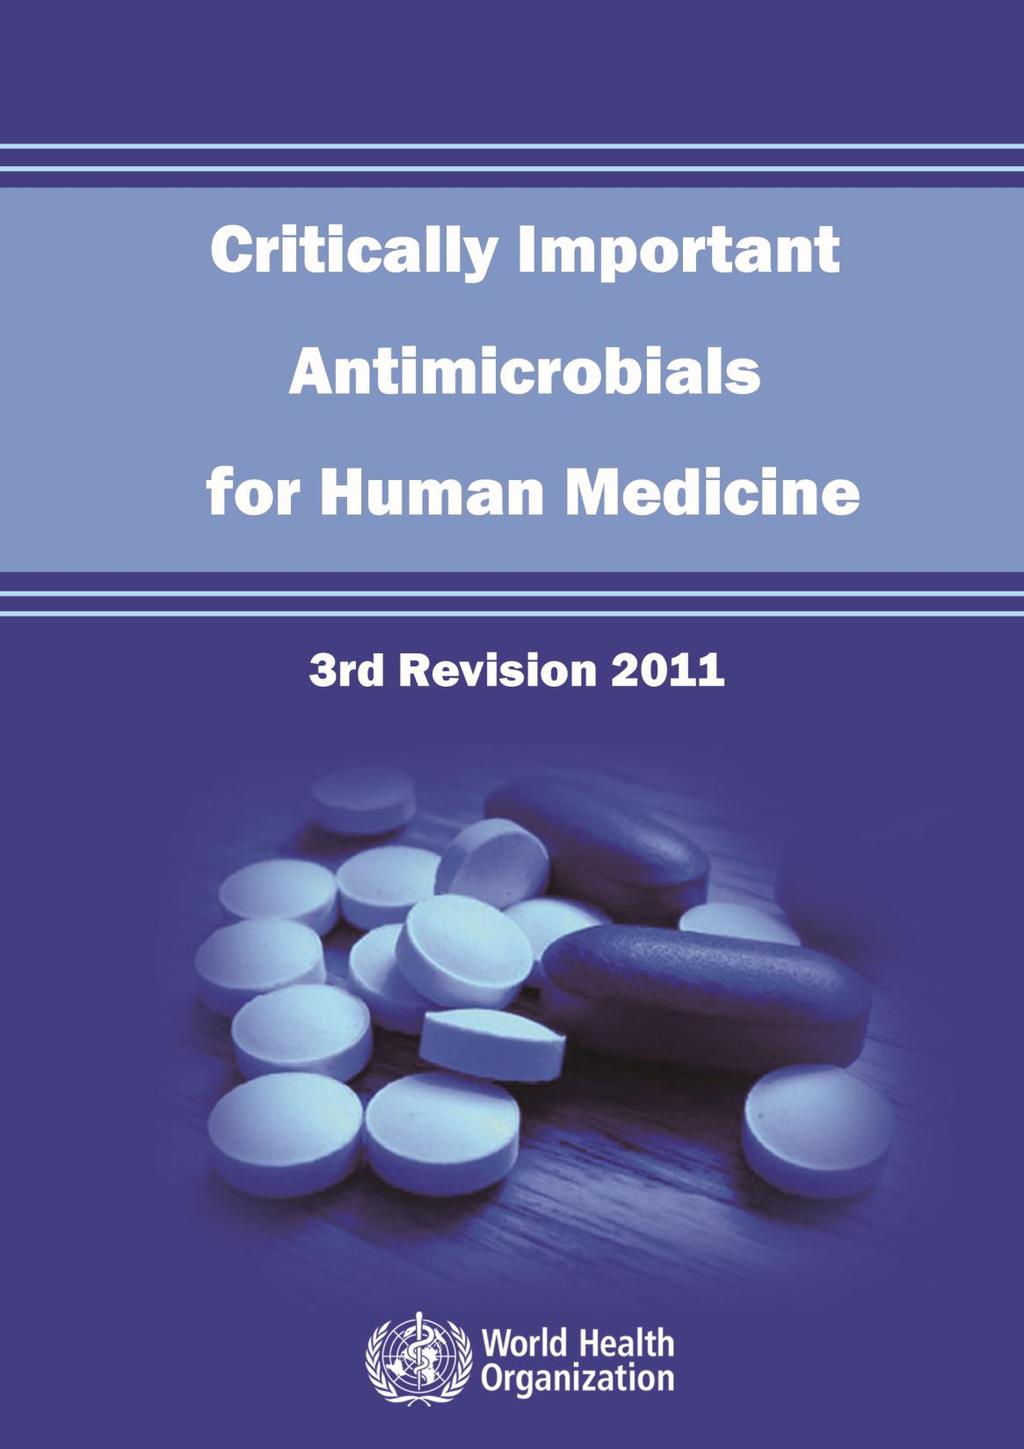 Highest Priority Critically Important Antimicrobials?